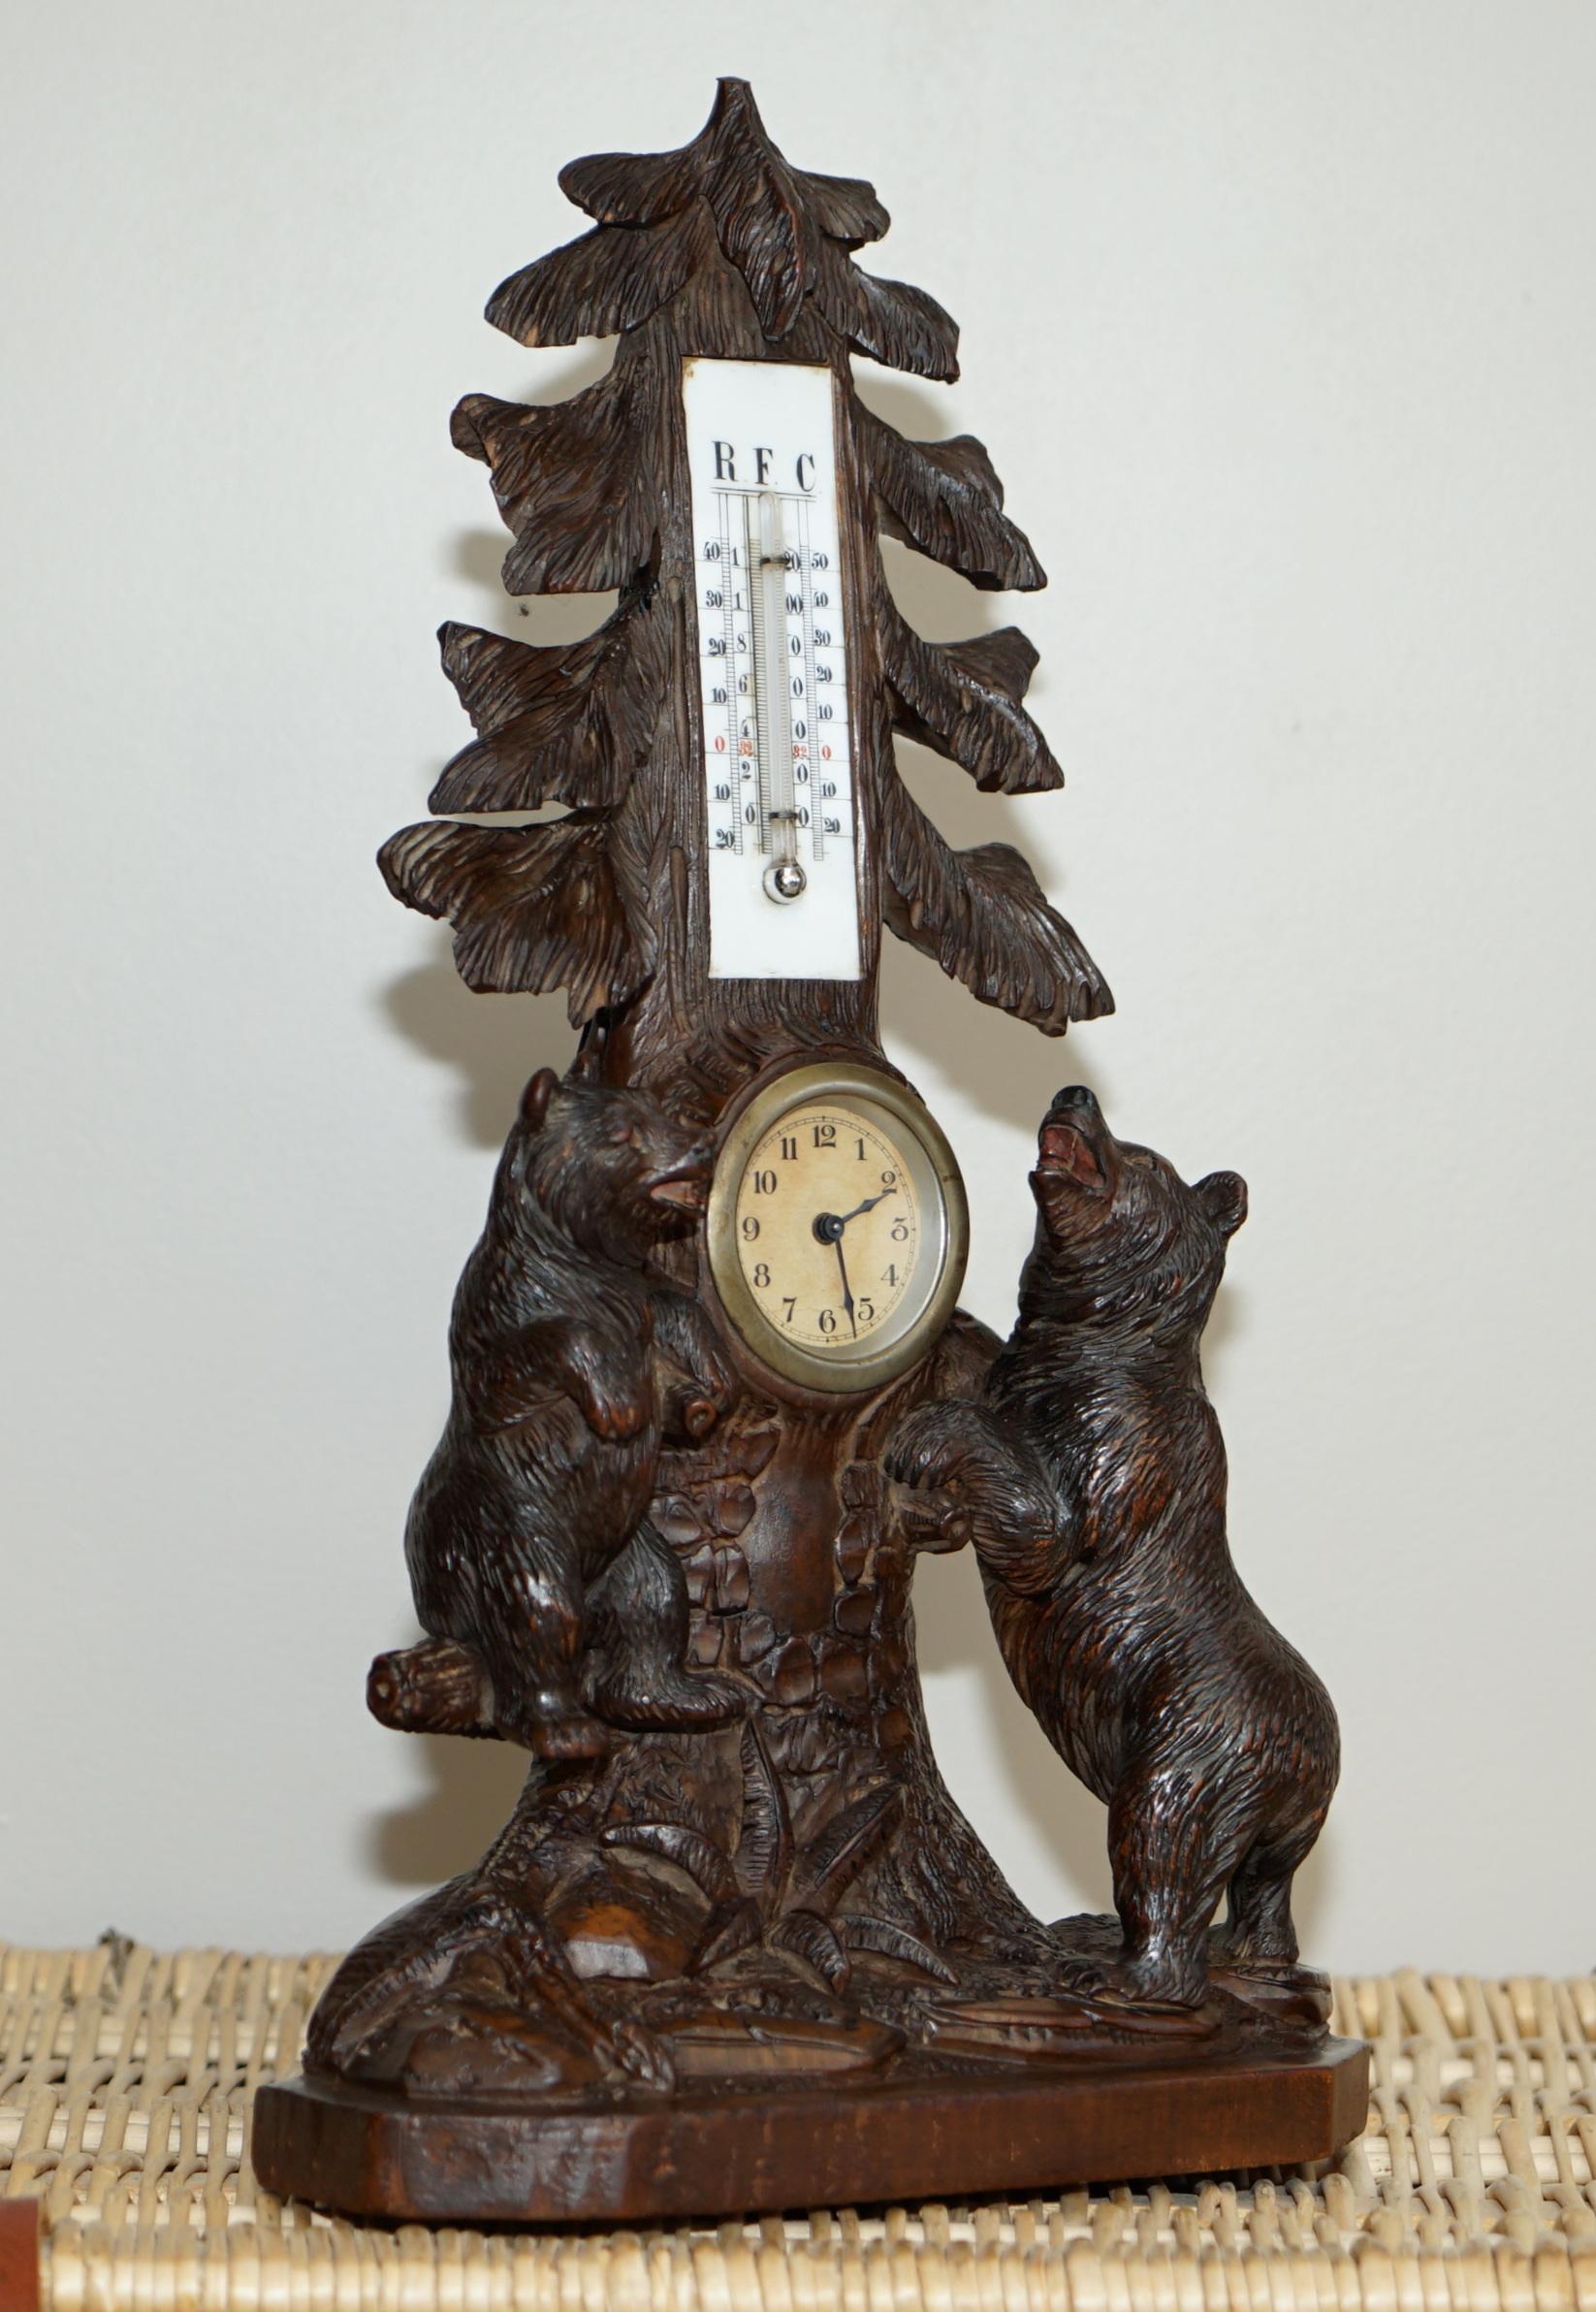 Wimbledon-Furniture

Wimbledon-Furniture is delighted to offer for sale this stunning original 19th century black forest wood hand carved mantle clock and thermometer of bears

Please note the delivery fee listed is just a guide, it covers